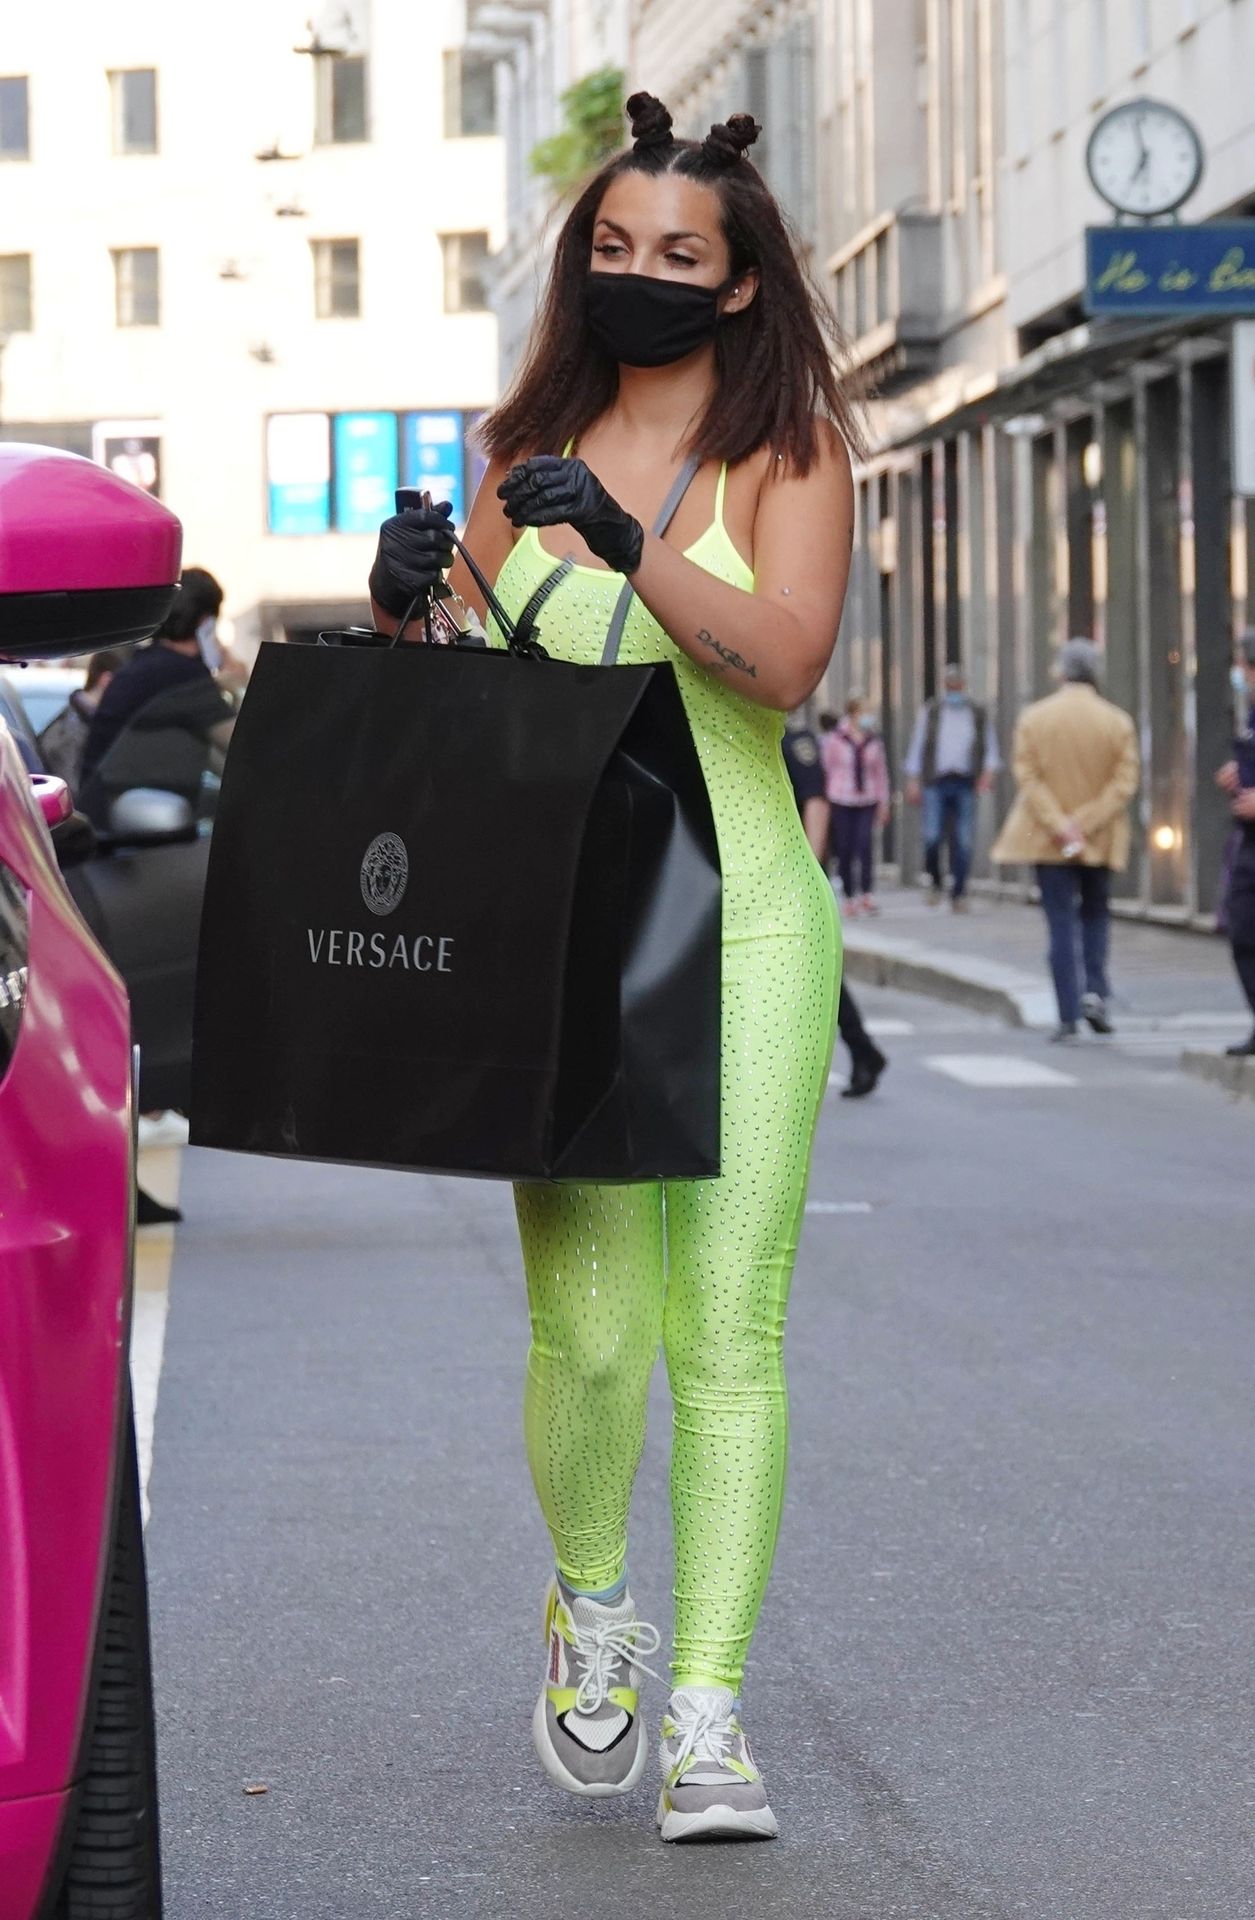 Elettra Lamborghini Shows Her Curves at Versace Store in Milan (38 Photos)